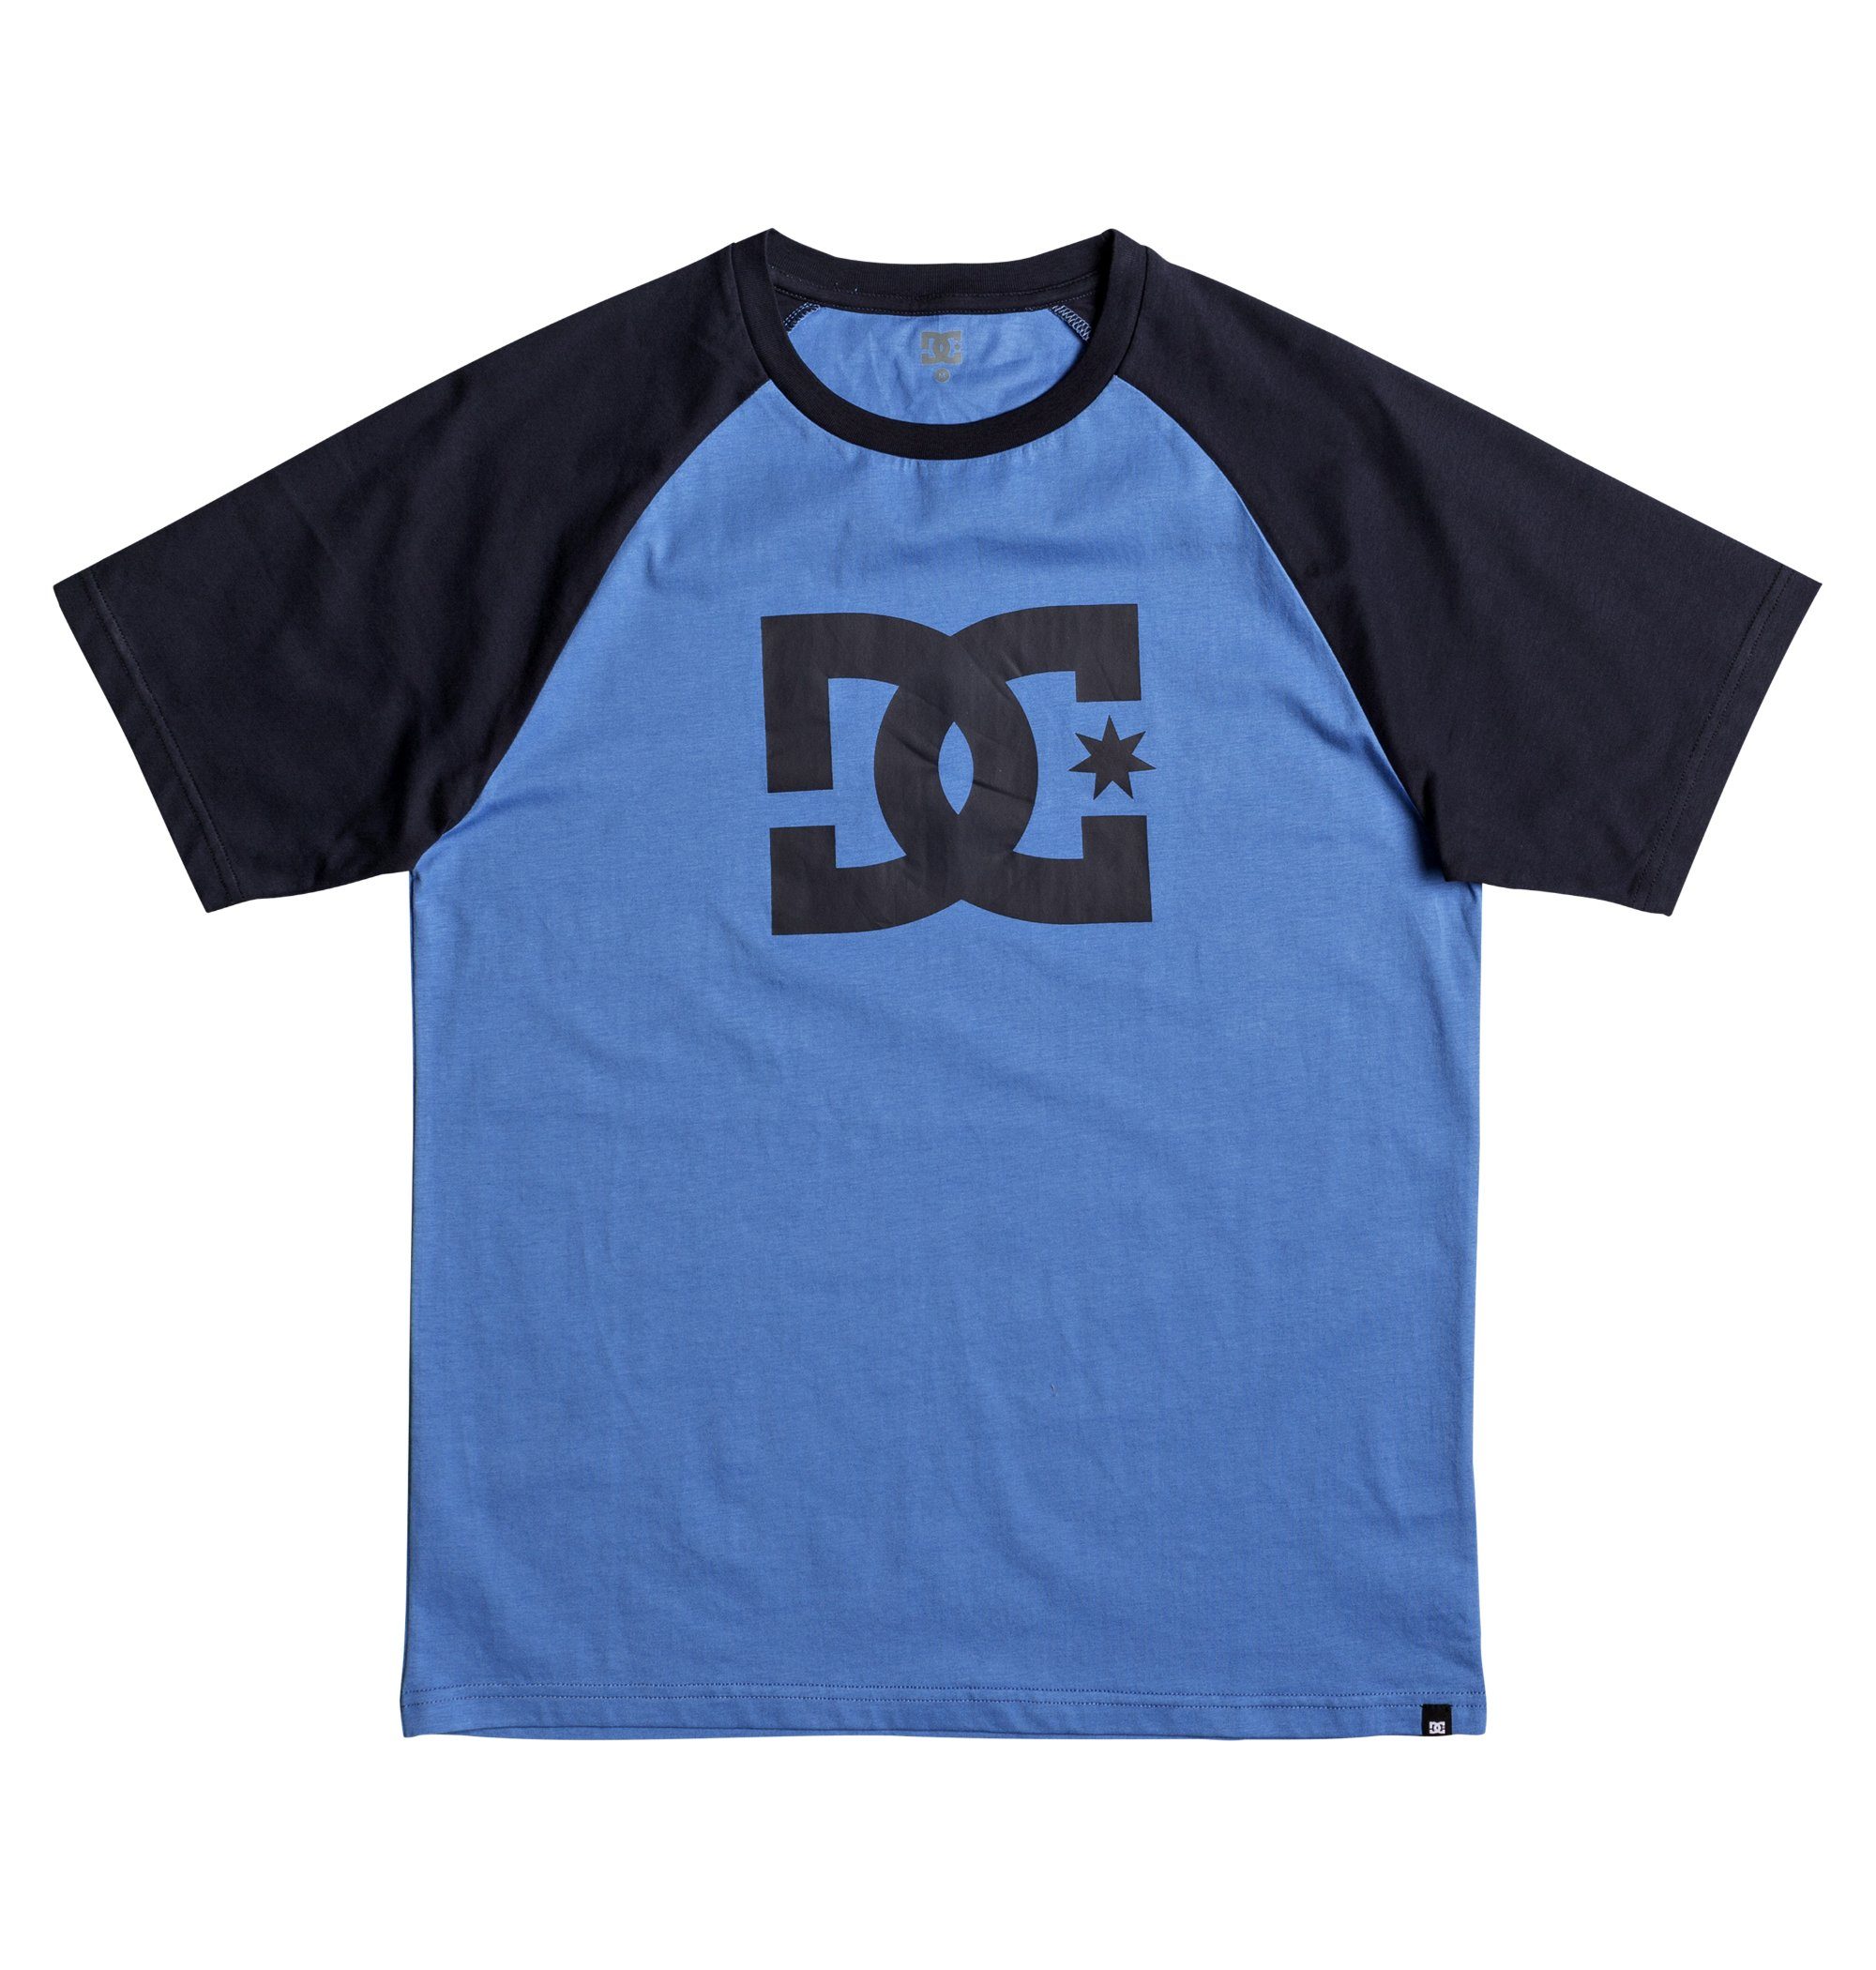 Otto - Dc Shoes NU 15% KORTING: DC Shoes T-Shirt Star